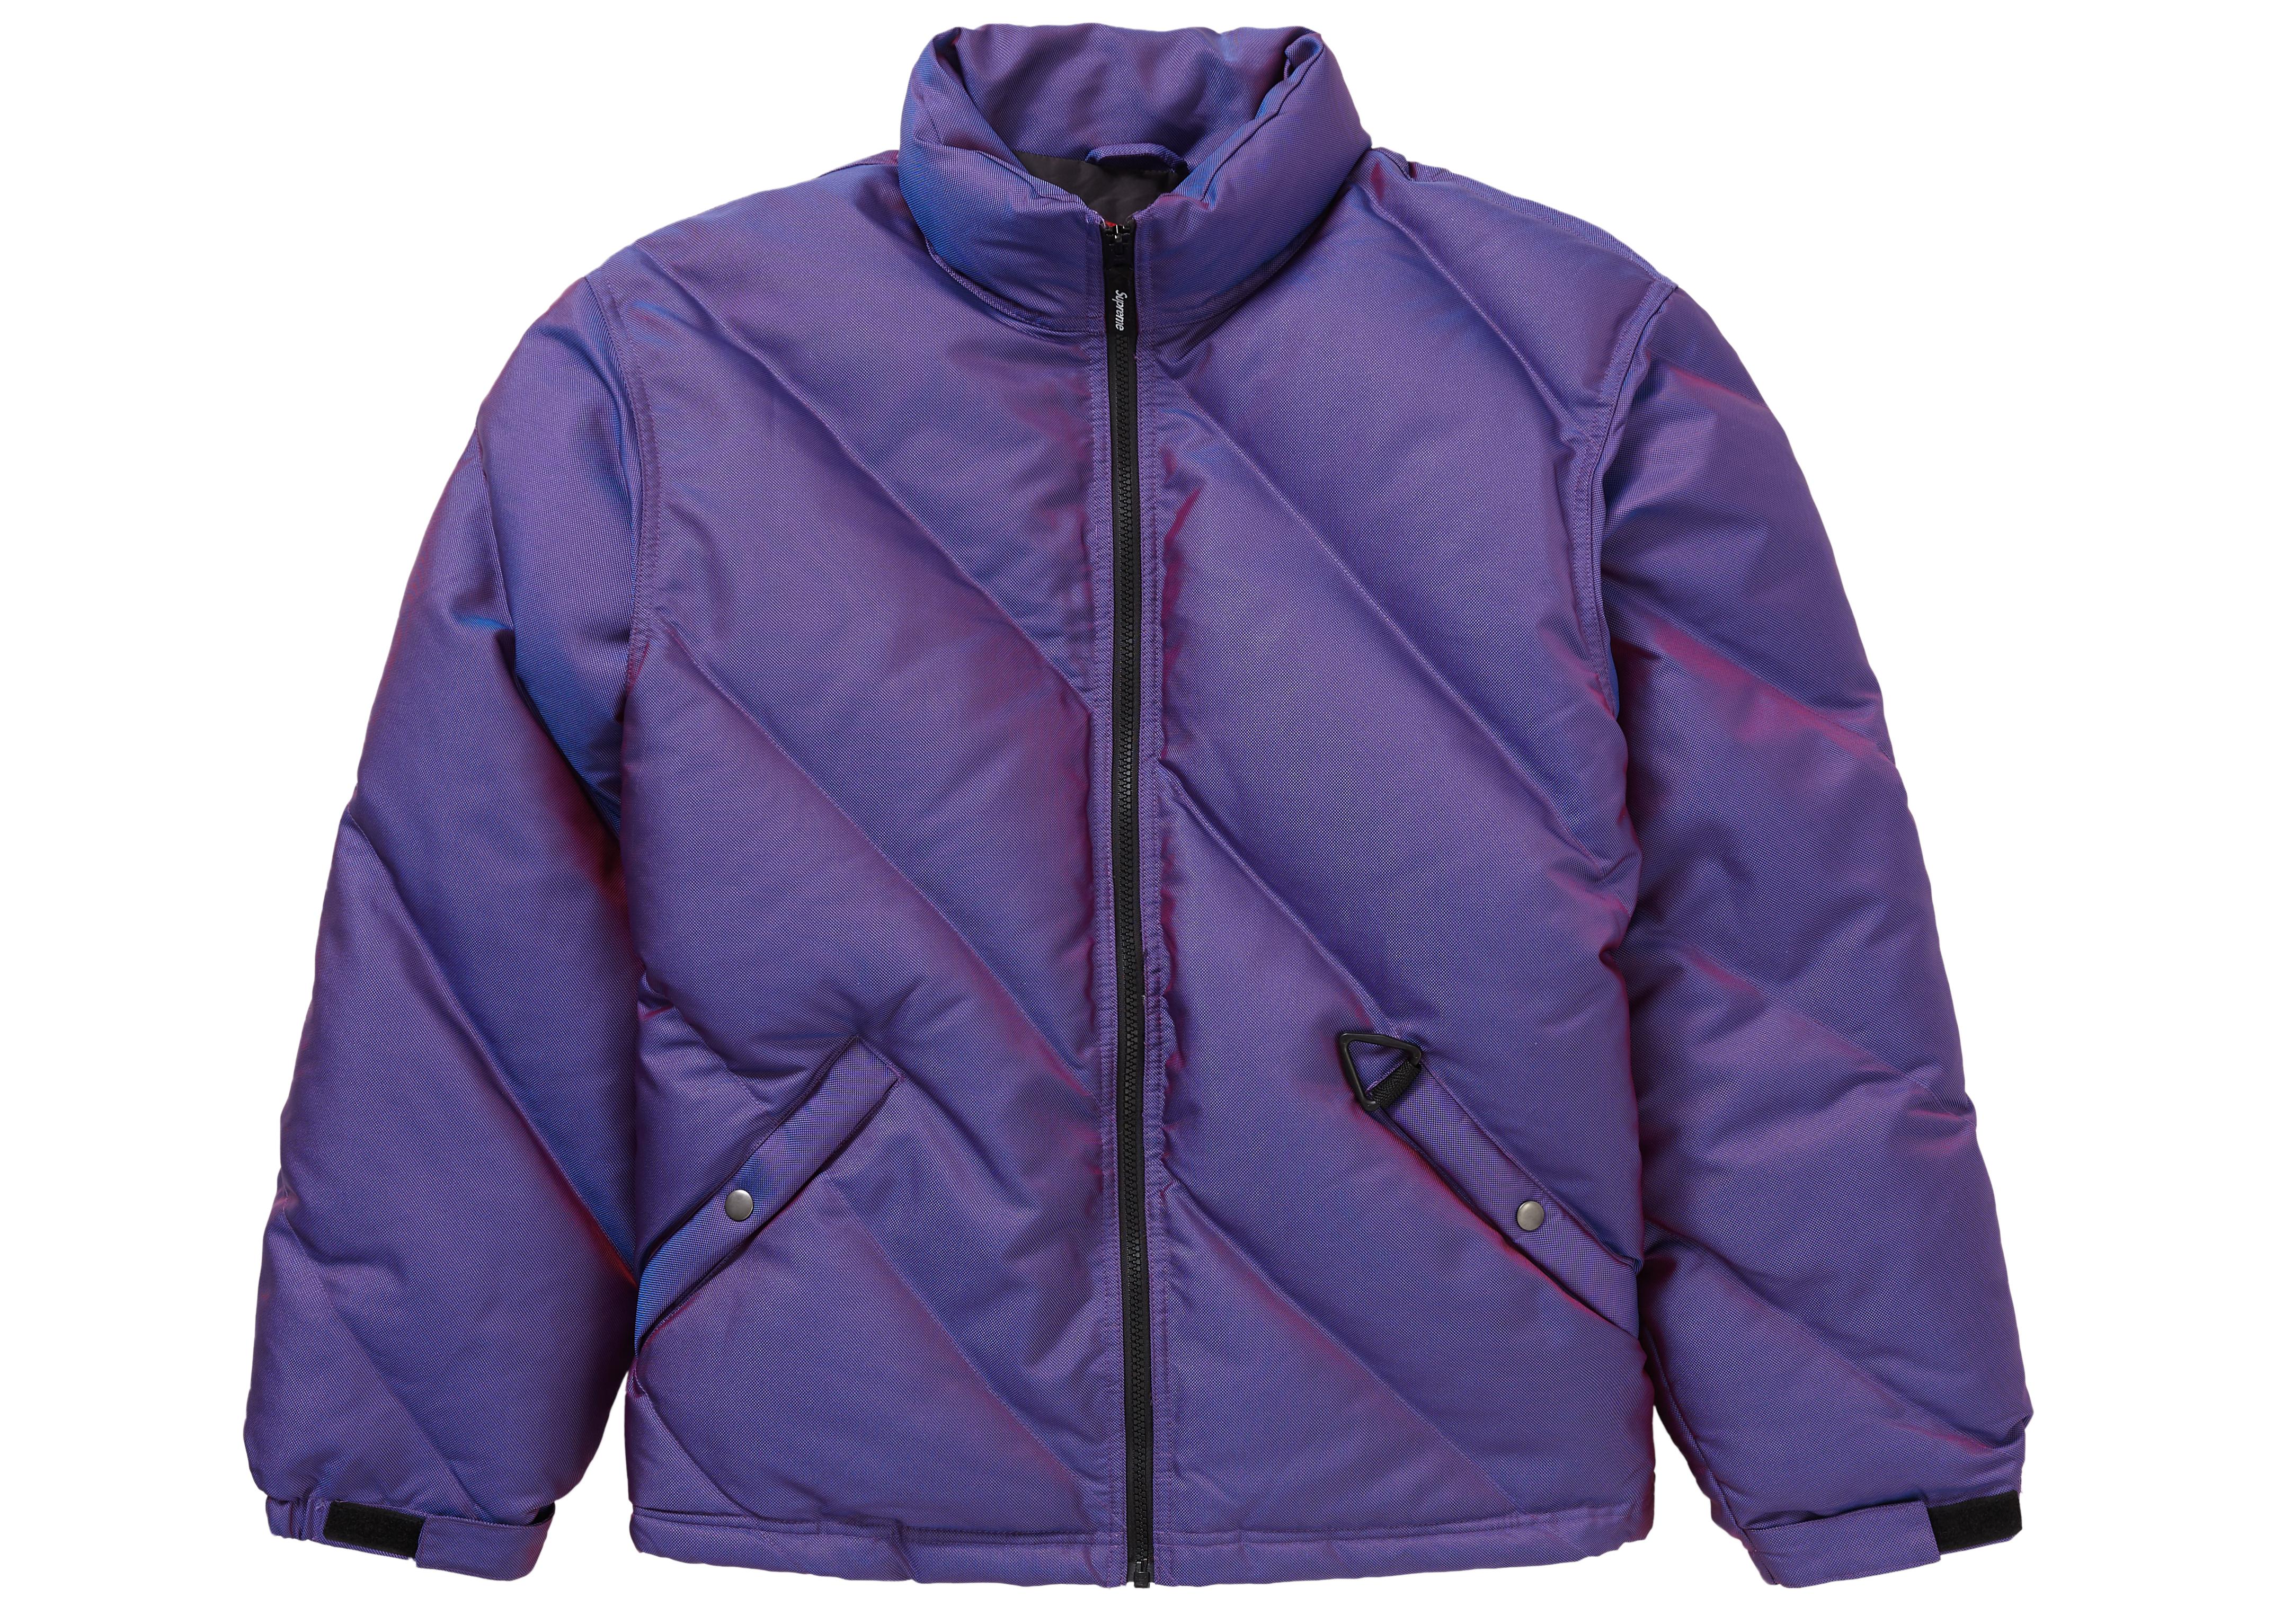 Supreme Iridescent Puffy Jacket in Purple for Men - Lyst